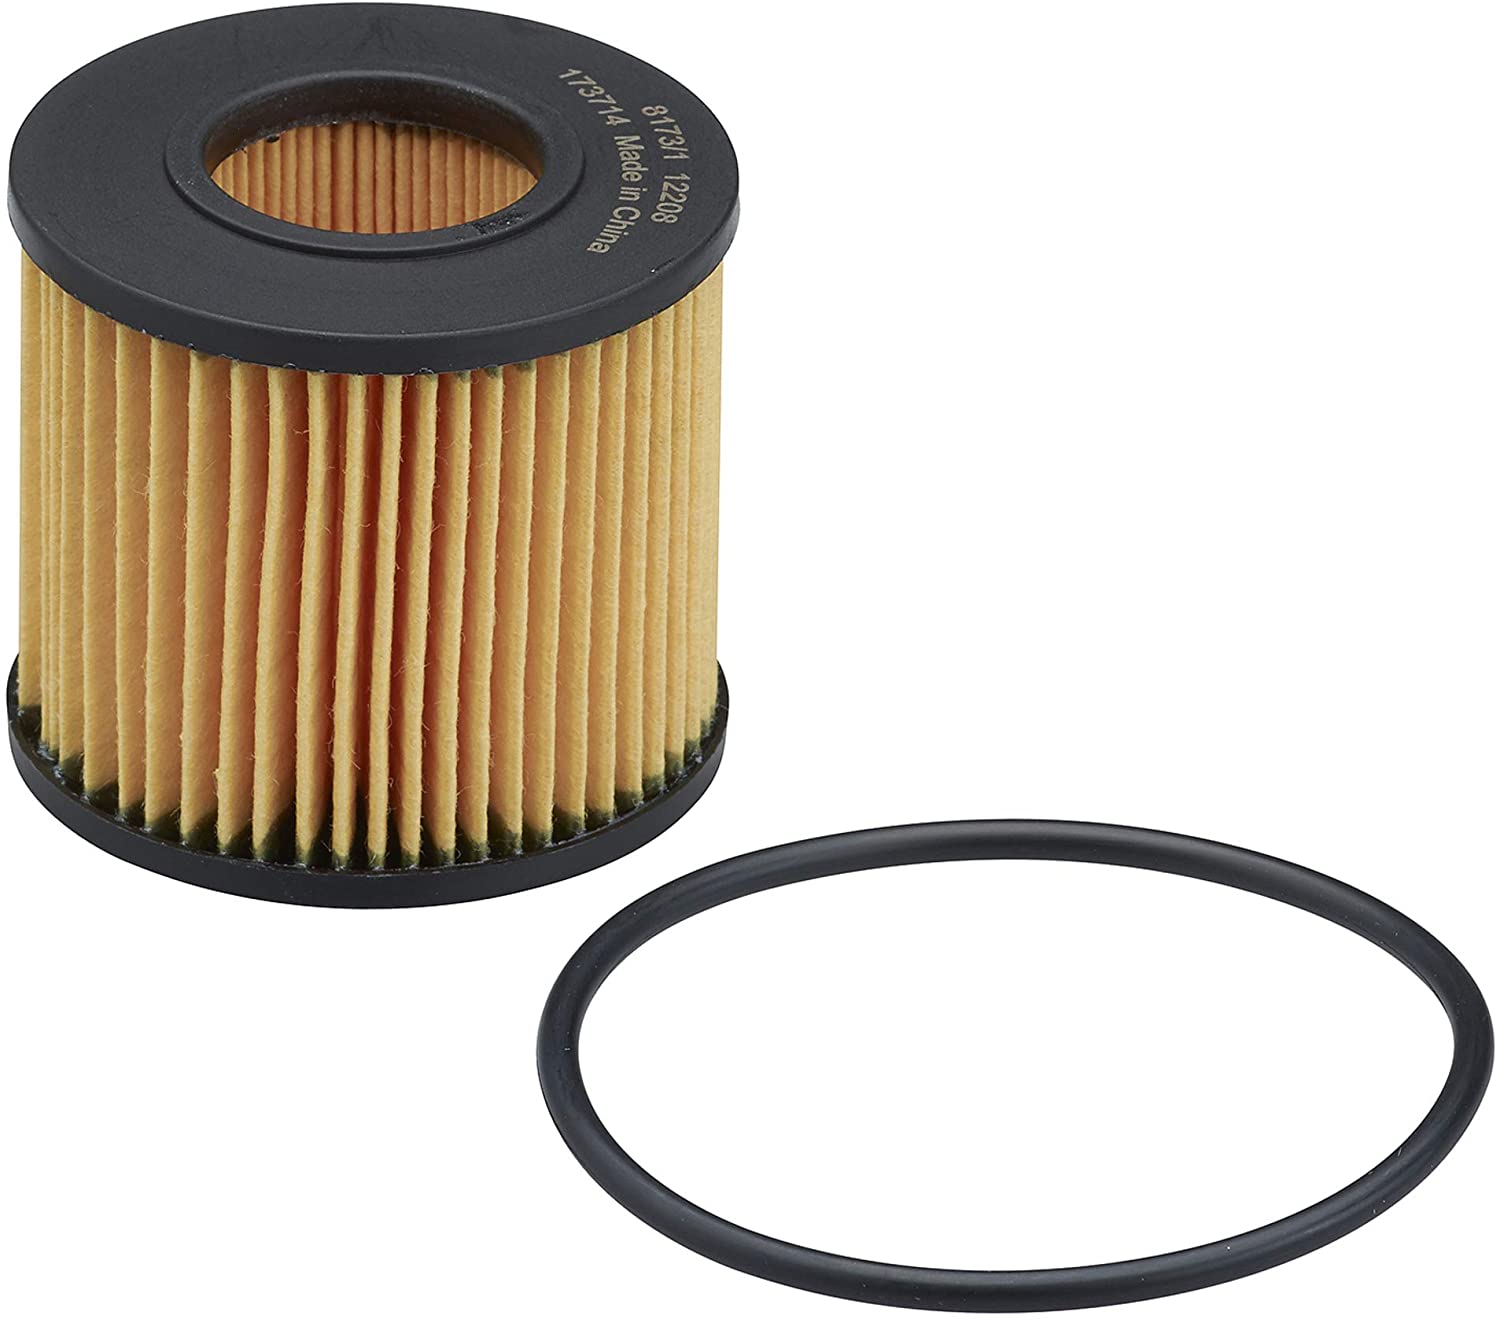 Champion COC10358 Cartridge Oil Filter, 1 Pack